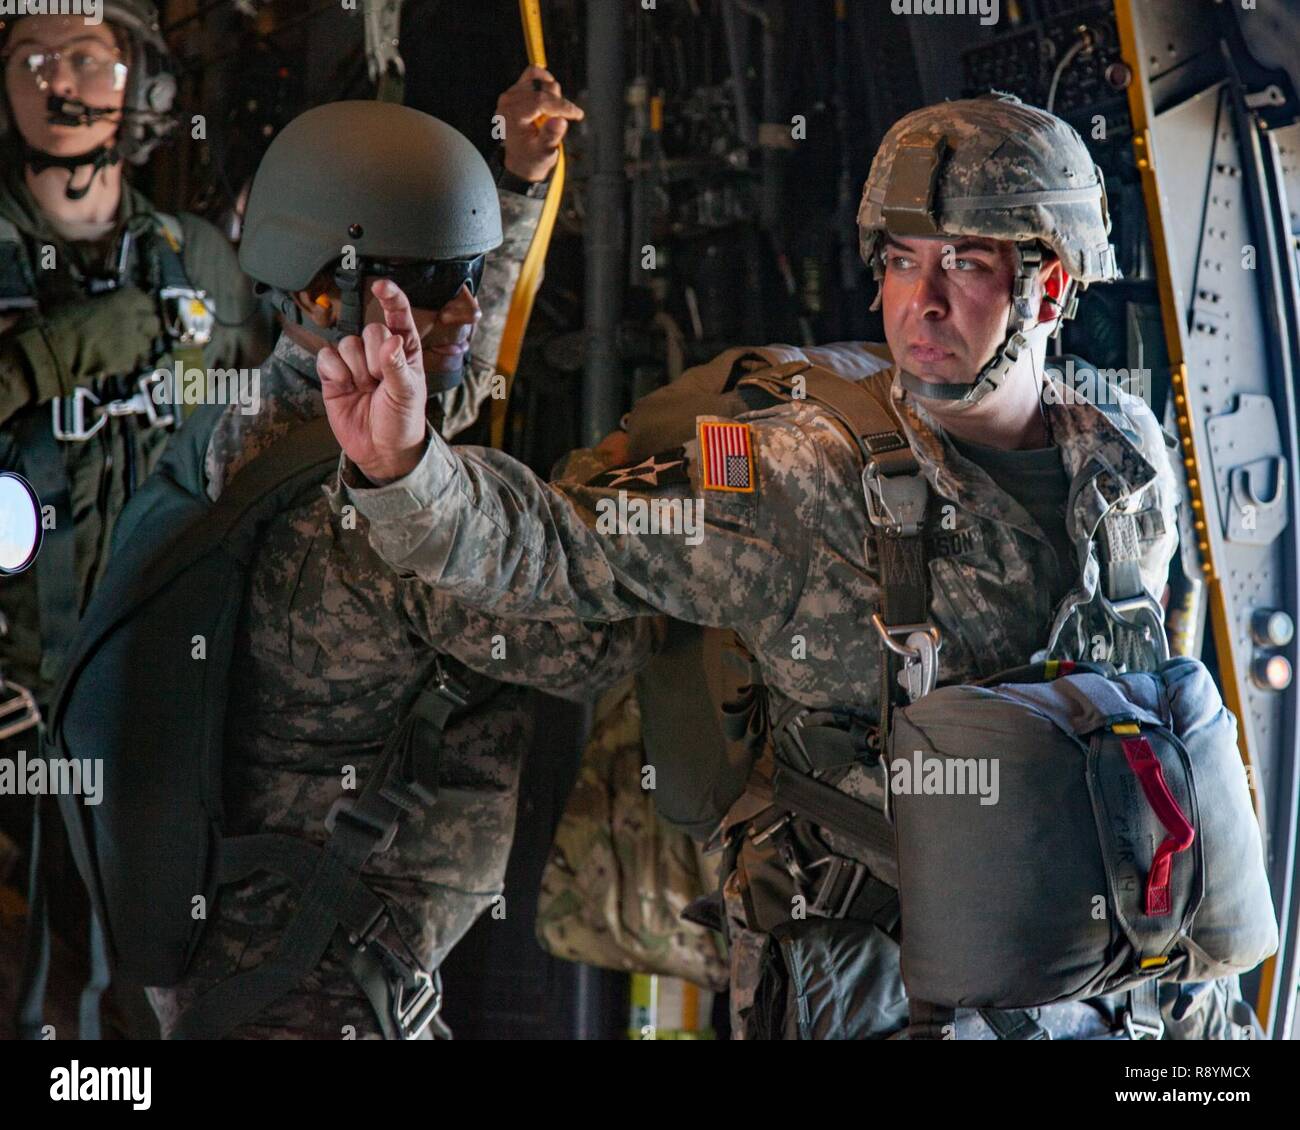 U.S. Army Sgt. 1st Class Andrew Severson of the 15th Psychological Operations Battalion uses hand signals to communicate with another JumpMaster during a static line jump over Augusta, Ga., March 3, 2017. The paratroopers jump to fulfill Airborne obligations while also building confidence and experience, ensuring they remain mission capable. Stock Photo